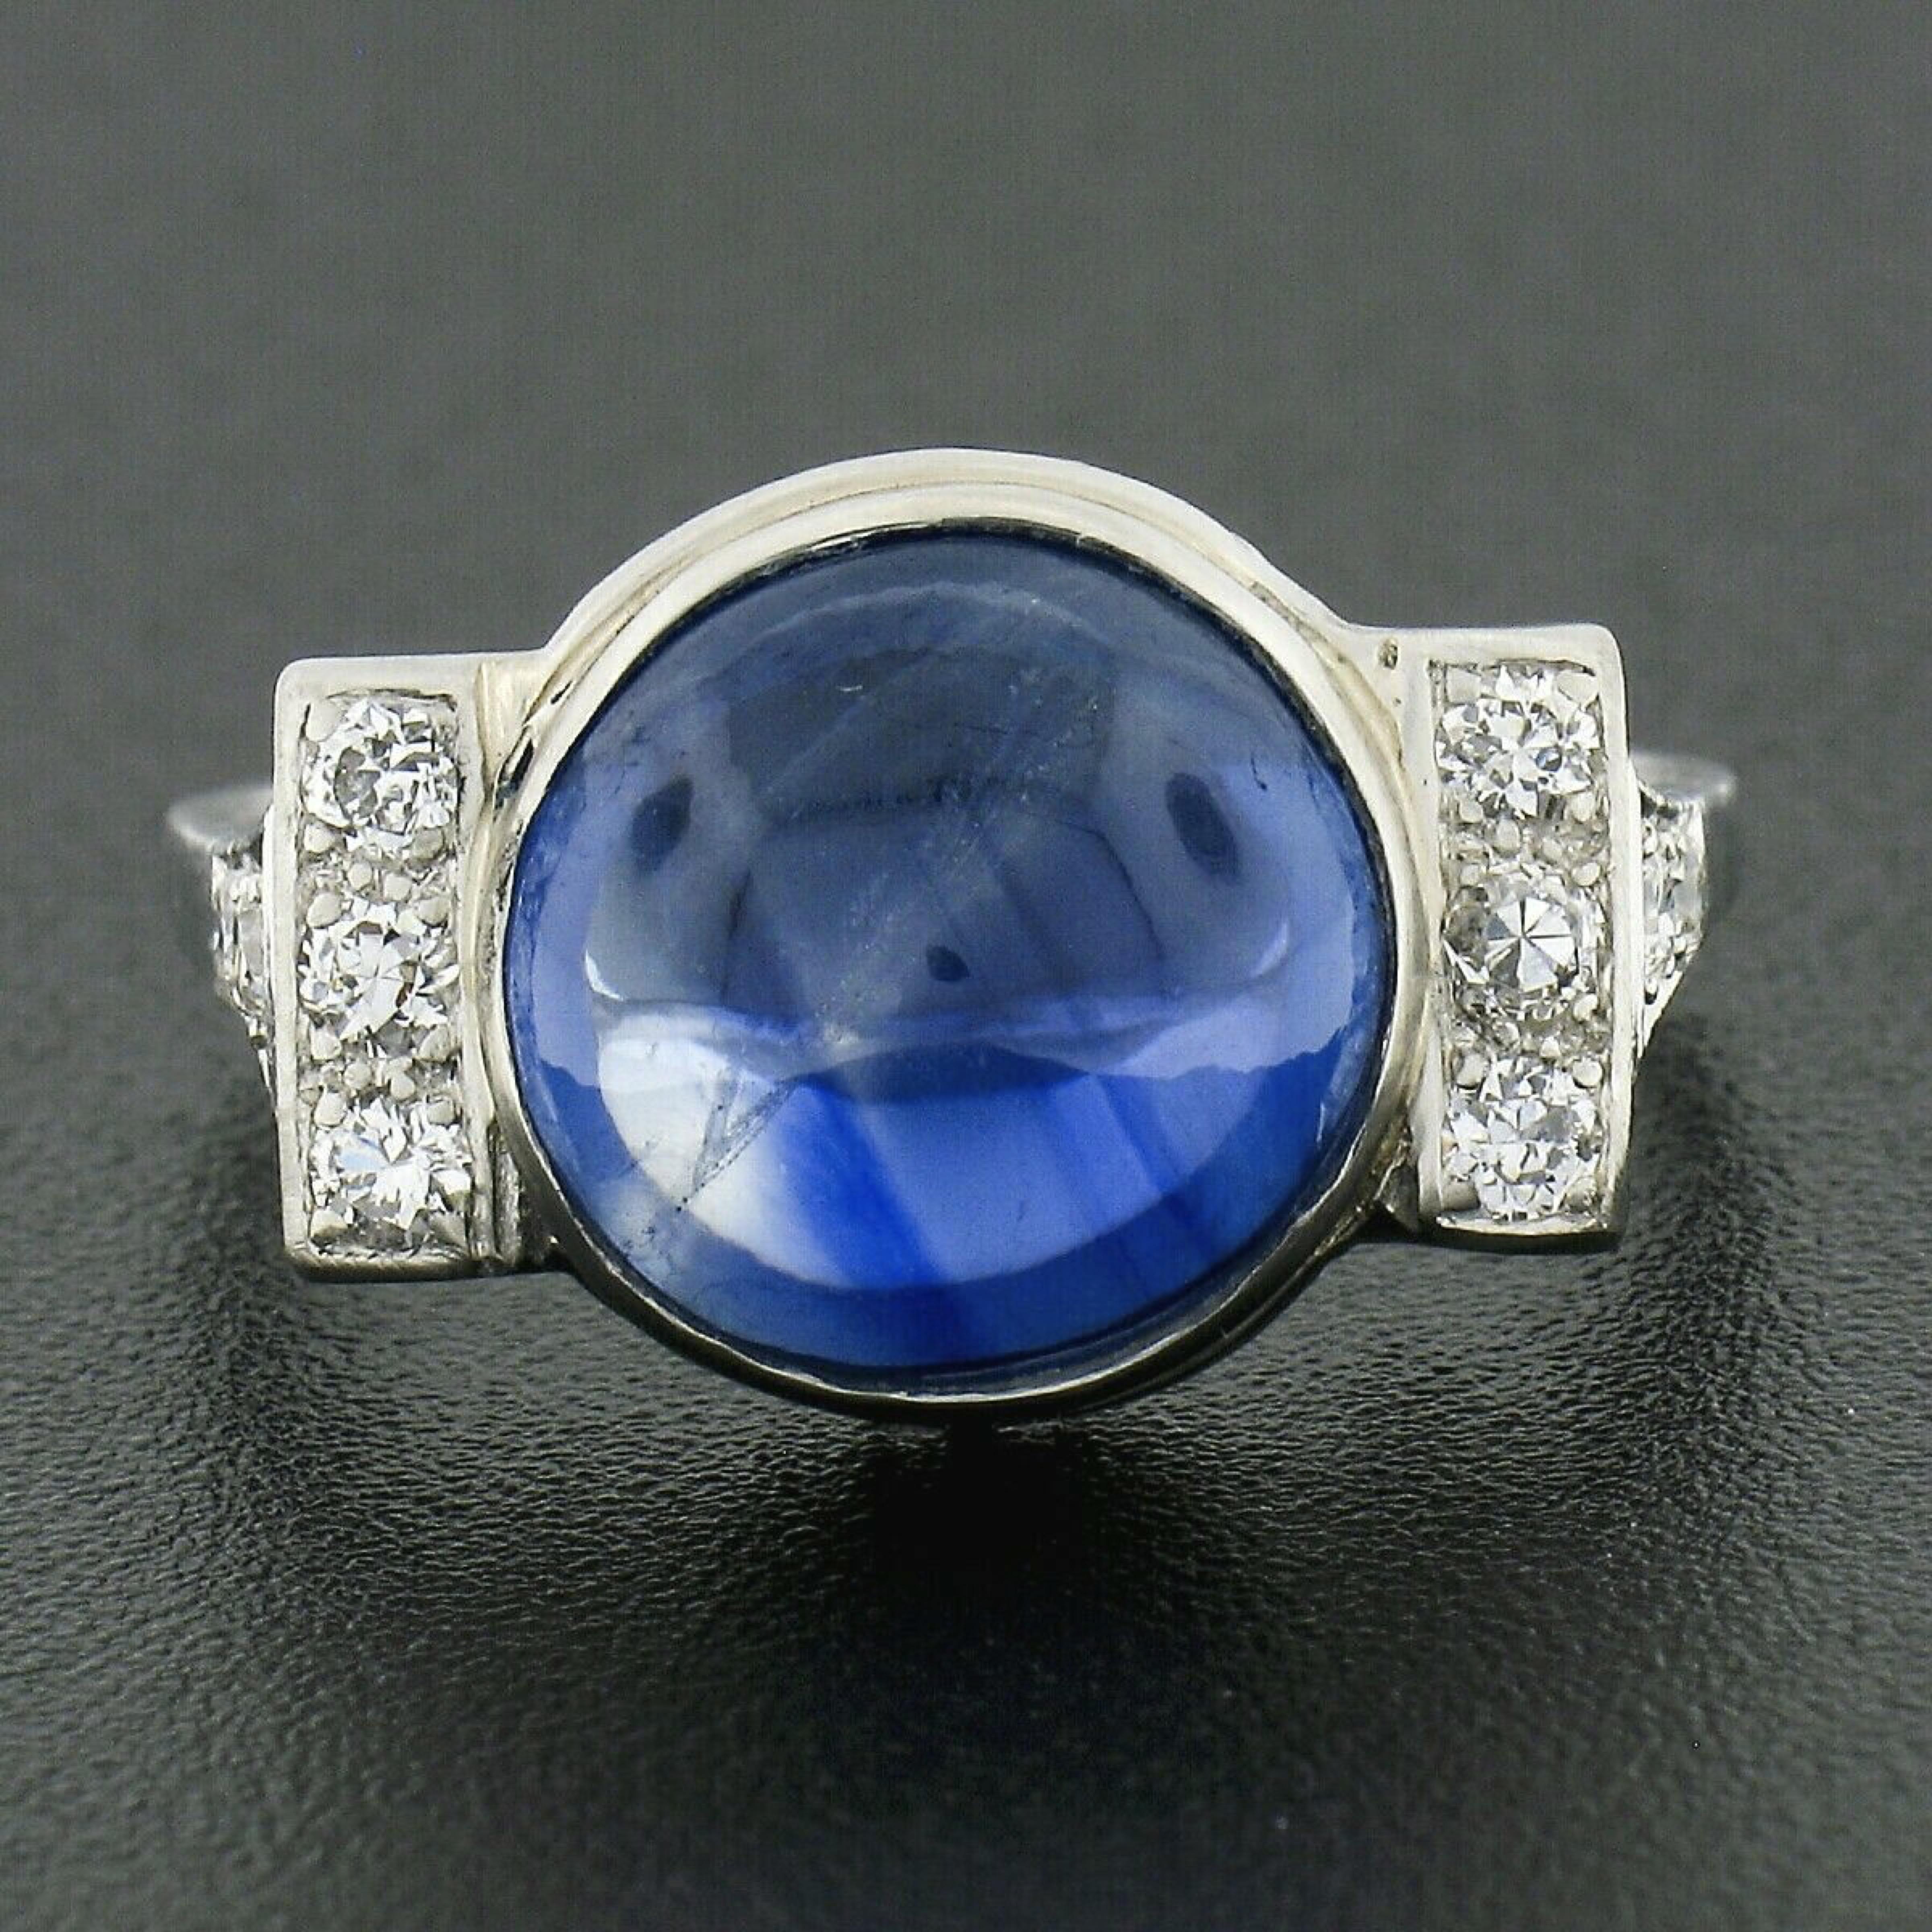 This magnificent antique cocktail ring was crafted during the art deco period from solid platinum and features a gorgeous, Gubelin certified, natural sapphire neatly bezel set at its center. The sapphire is certified as weighing exactly 7.91 carats